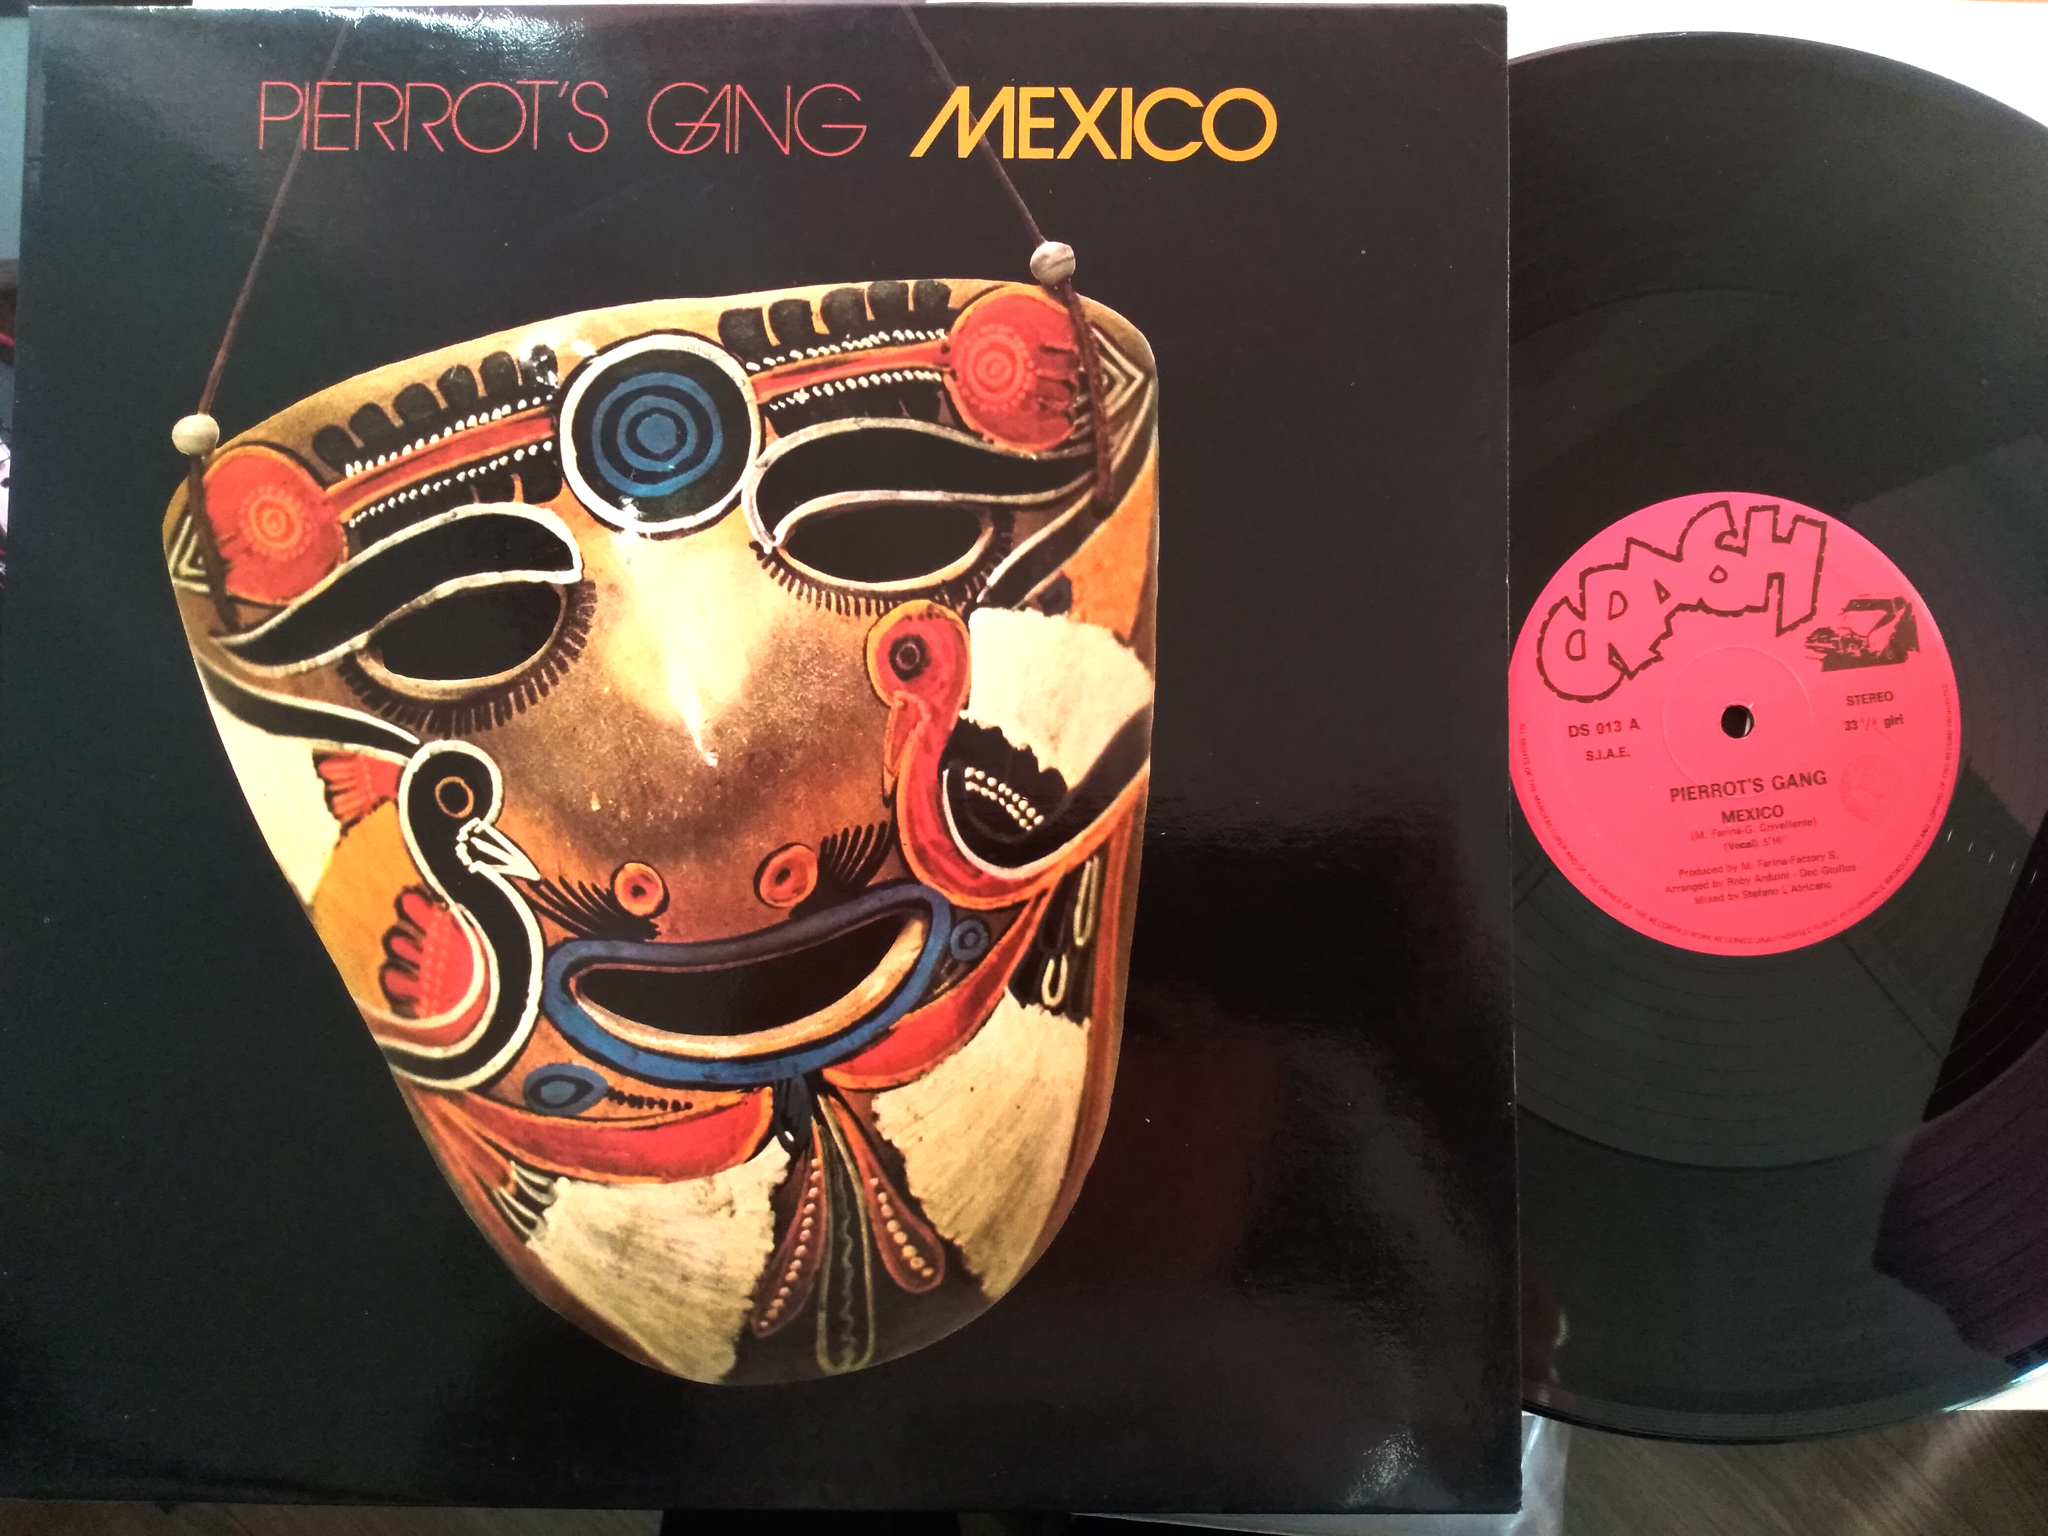 Perrot's Gang - Mexico